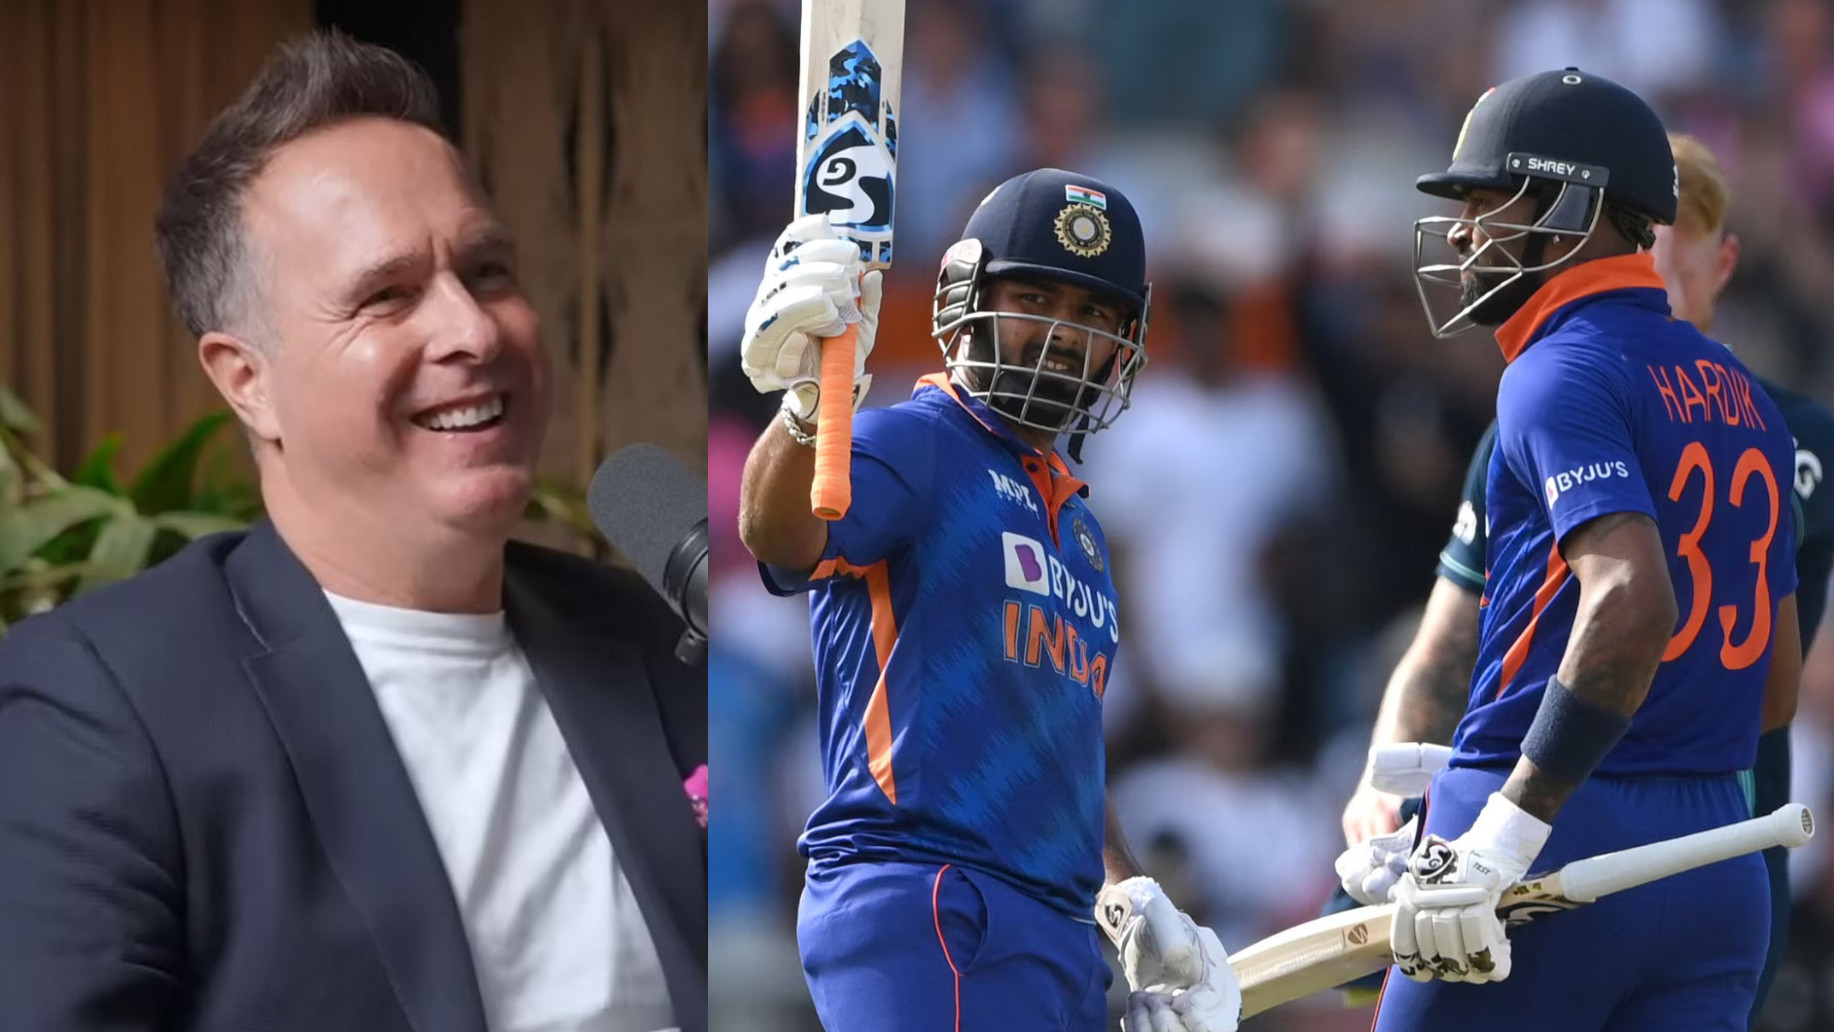 “Don’t think India will win T20 World Cup unless they have Hardik Pandya and Rishabh Pant”- Michael Vaughan